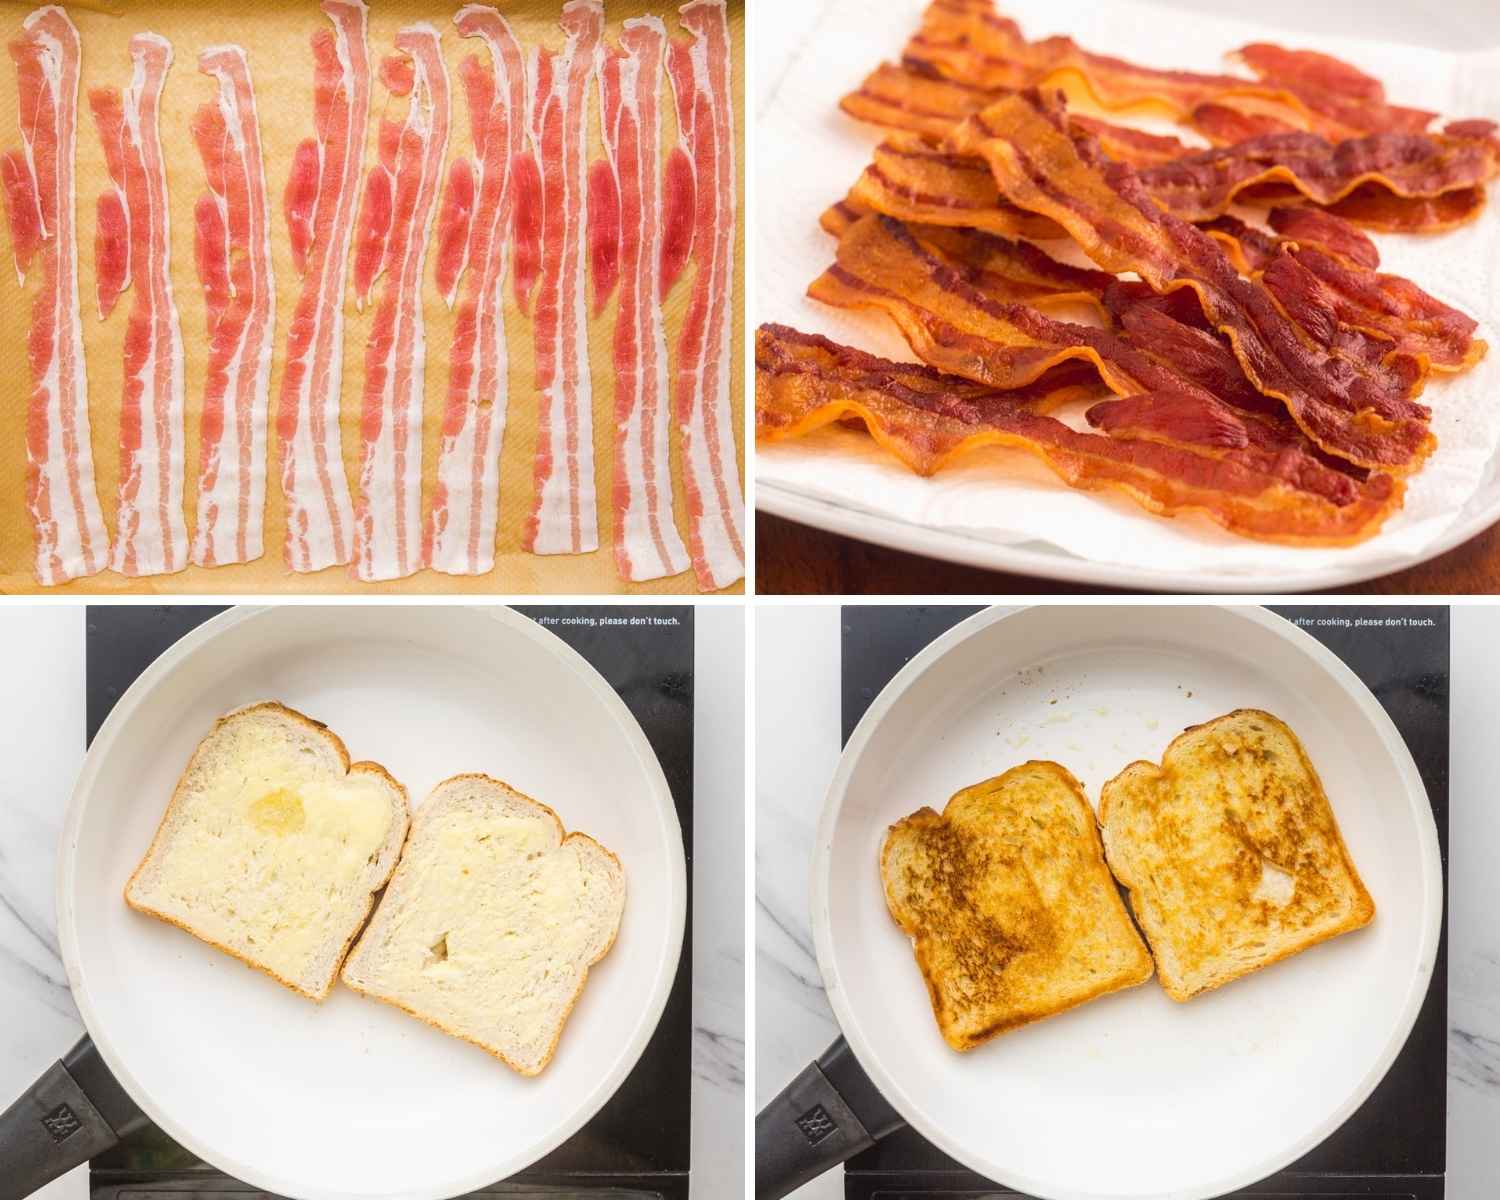 Collage of 4 images showing how to cook bacon and toast the bread.